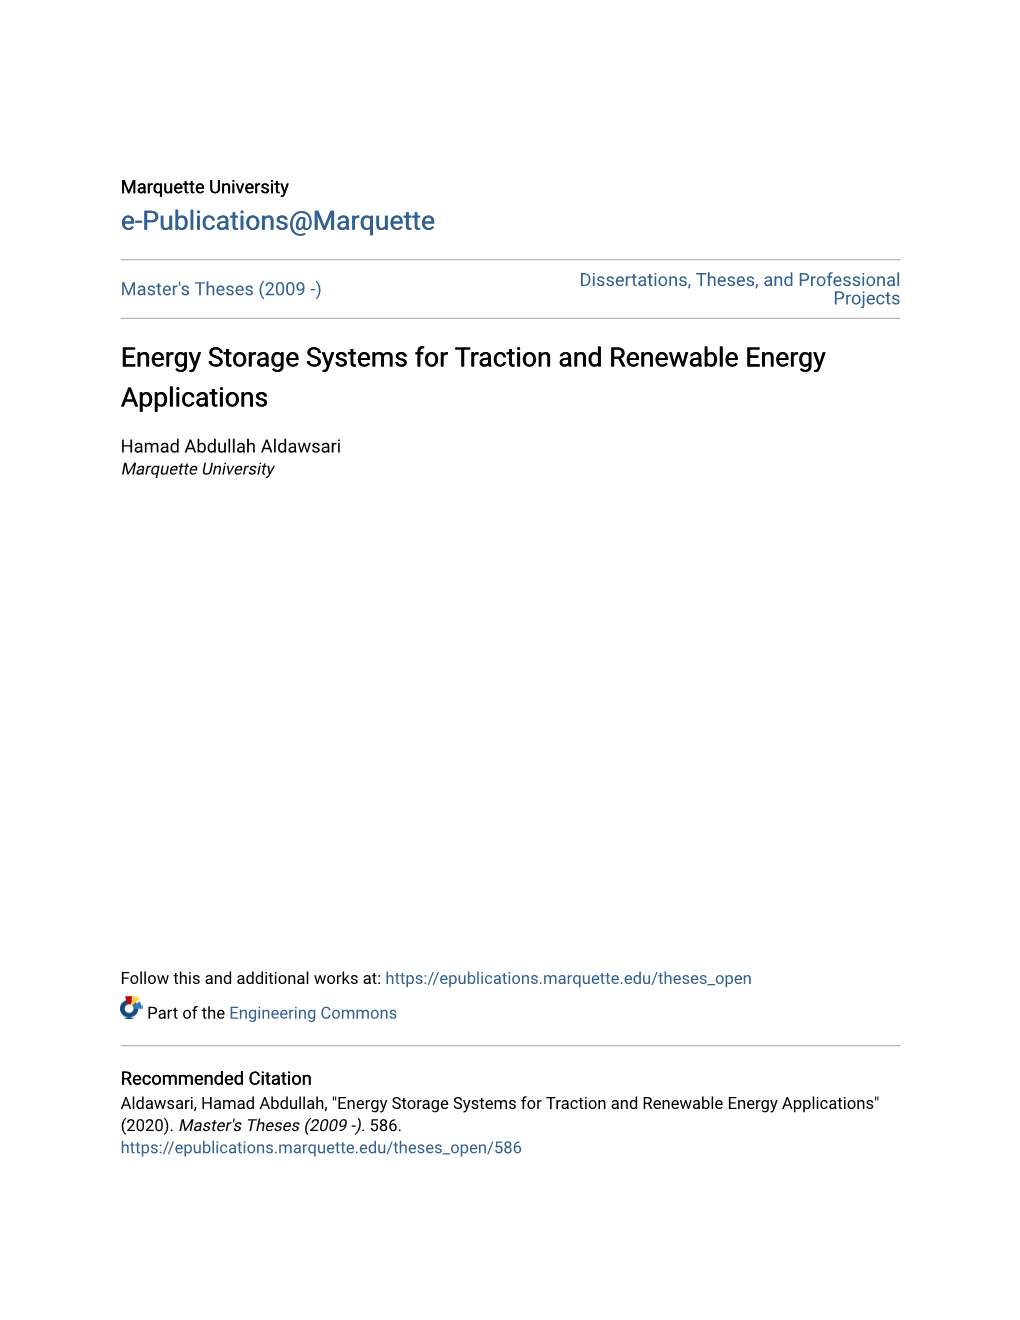 Energy Storage Systems for Traction and Renewable Energy Applications